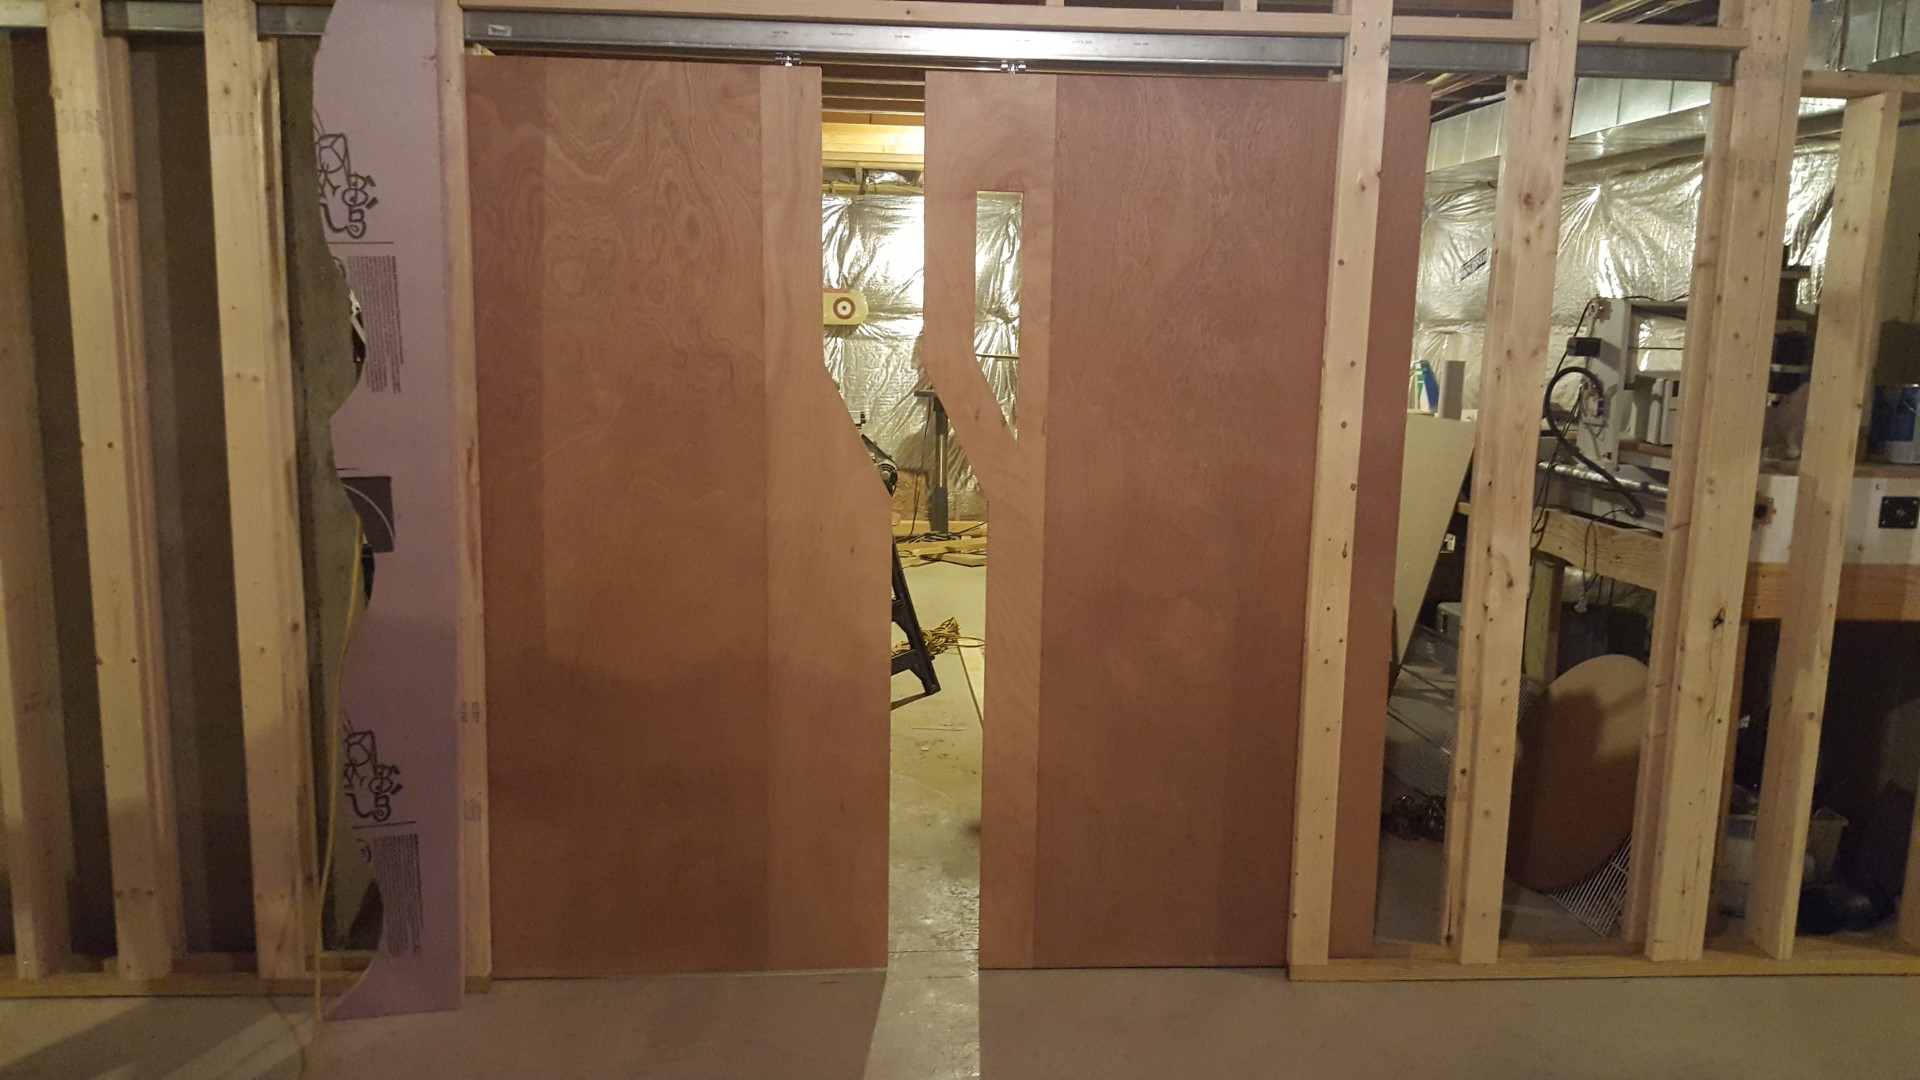 Three hollow core doors cut and glued together to look like a space ship air lock